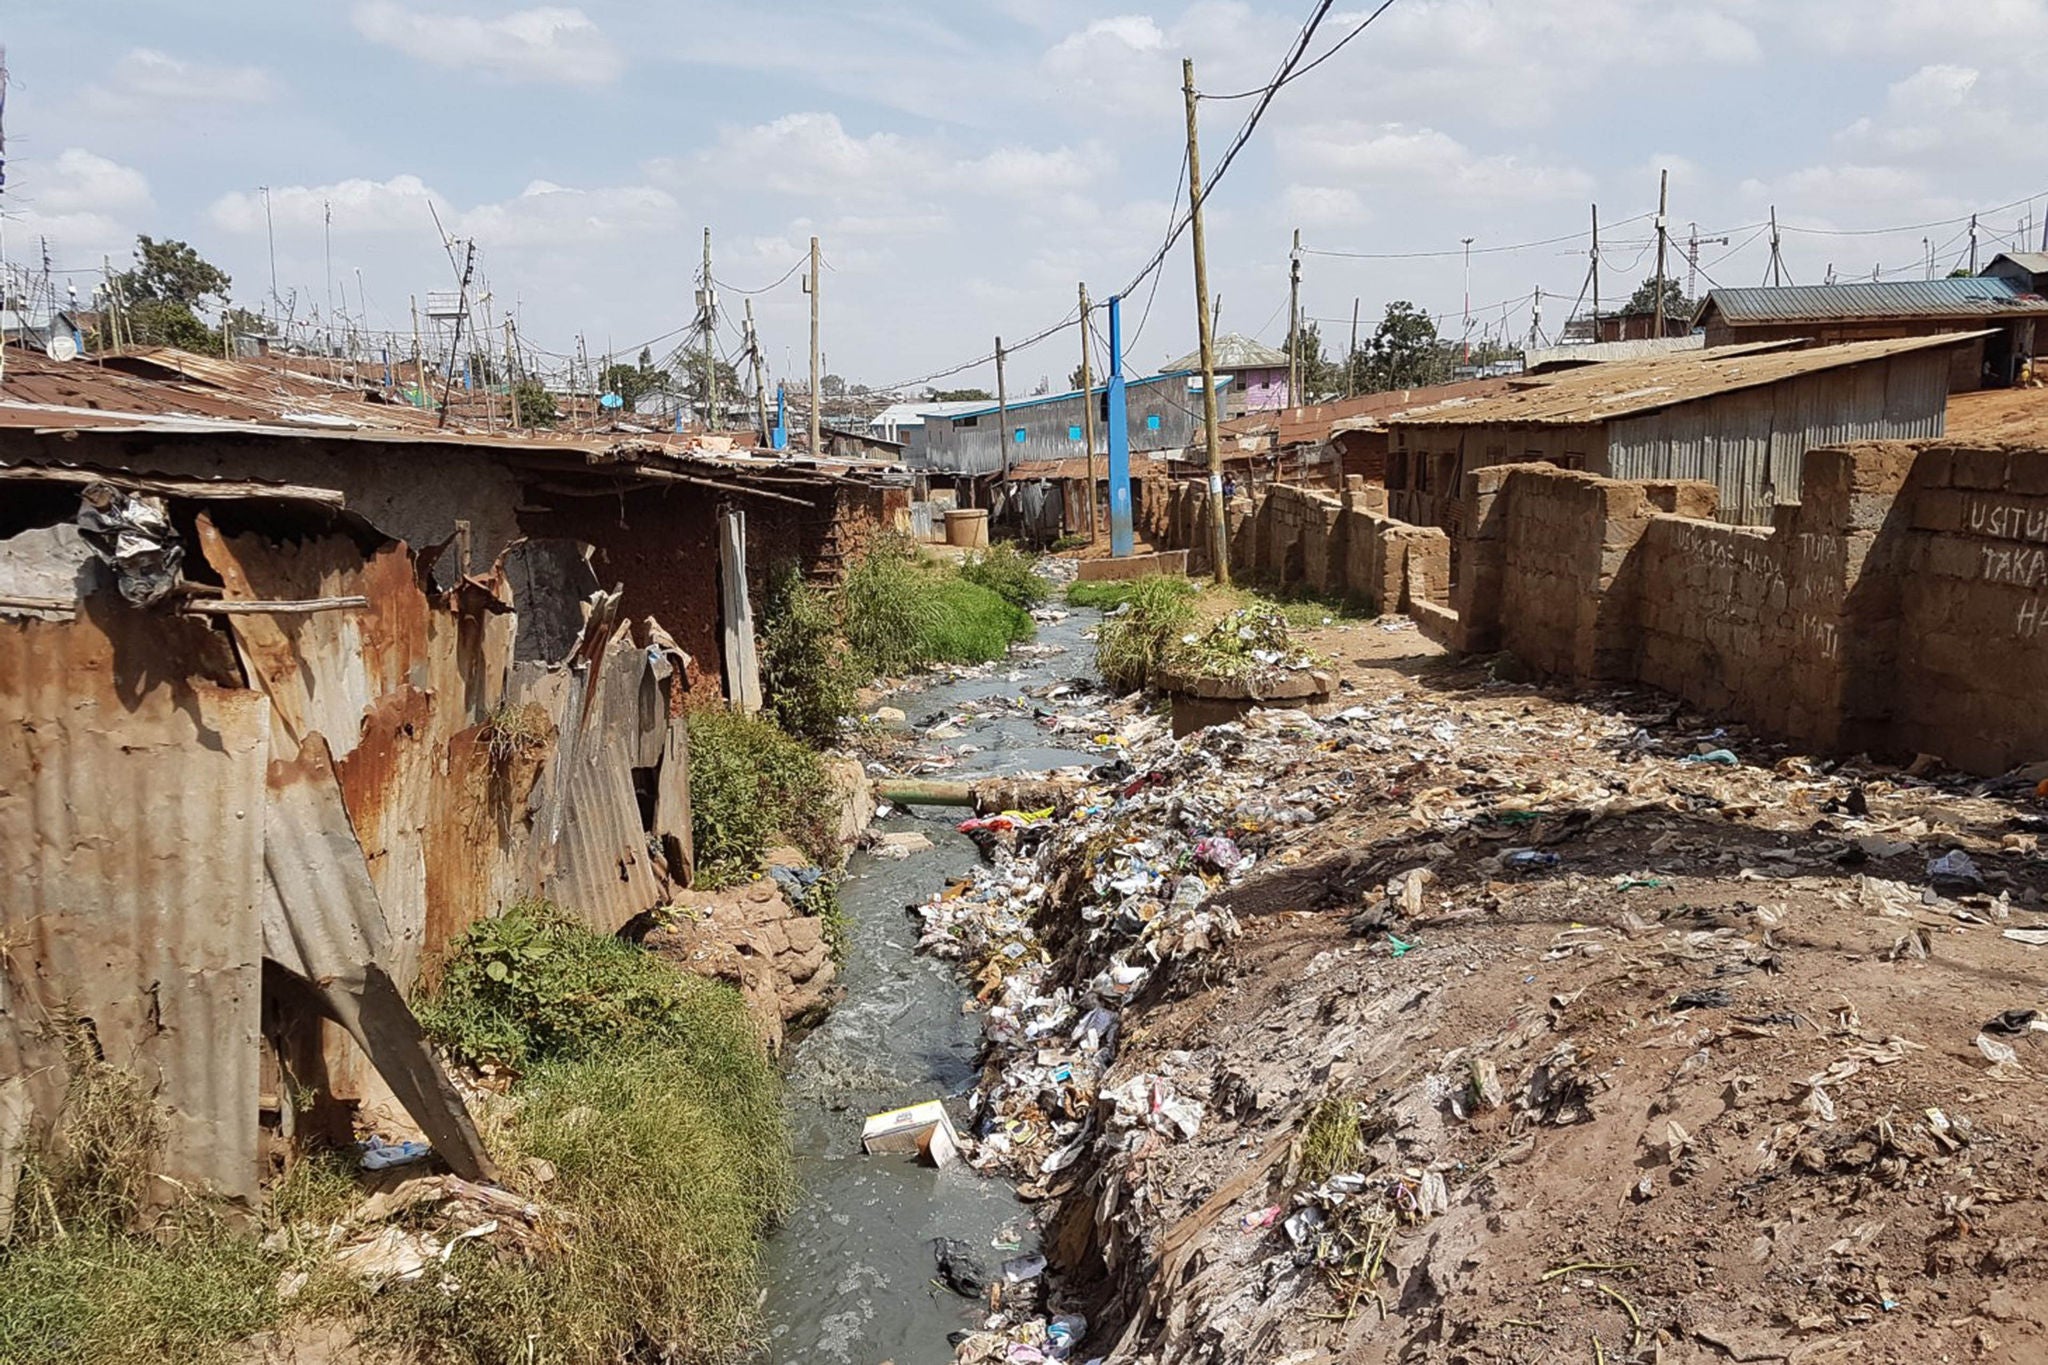 Shanty town polluted stream